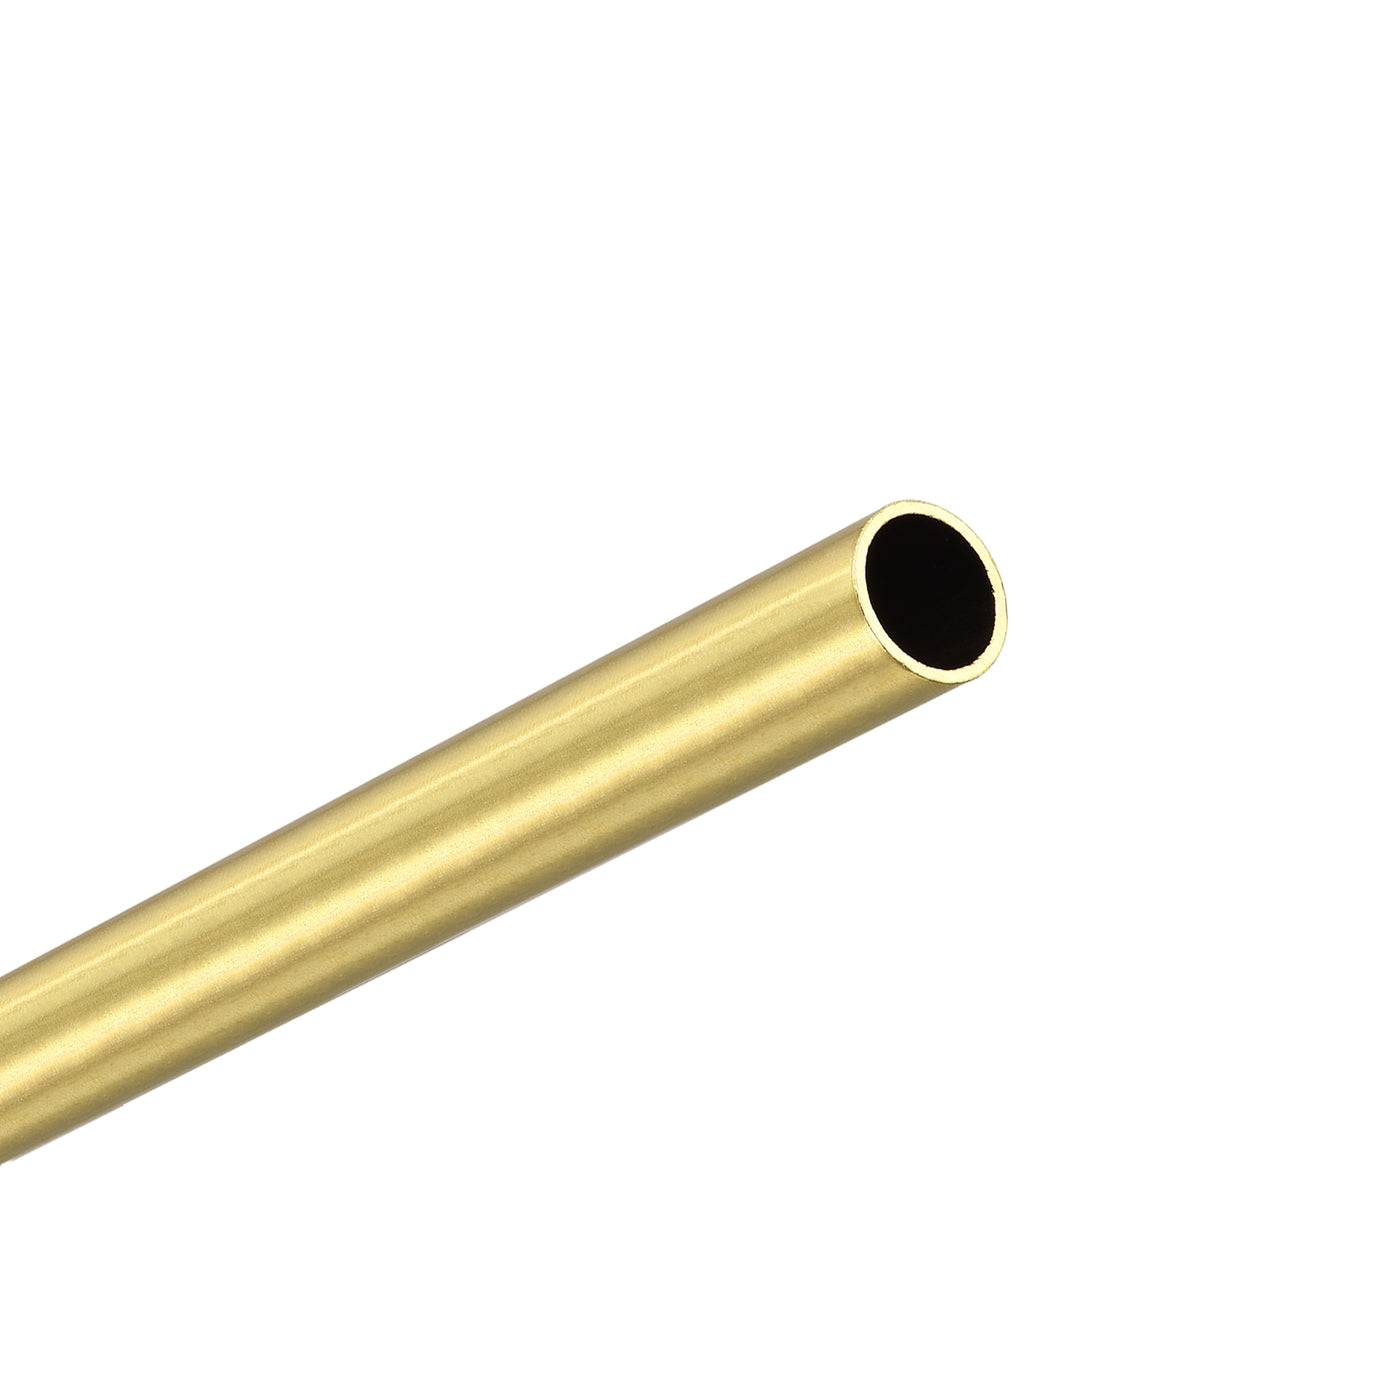 Uxcell Uxcell Brass Round Tube 9.5mm OD 0.25mm Wall Thickness 300mm Length Pipe Tubing 3 Pcs